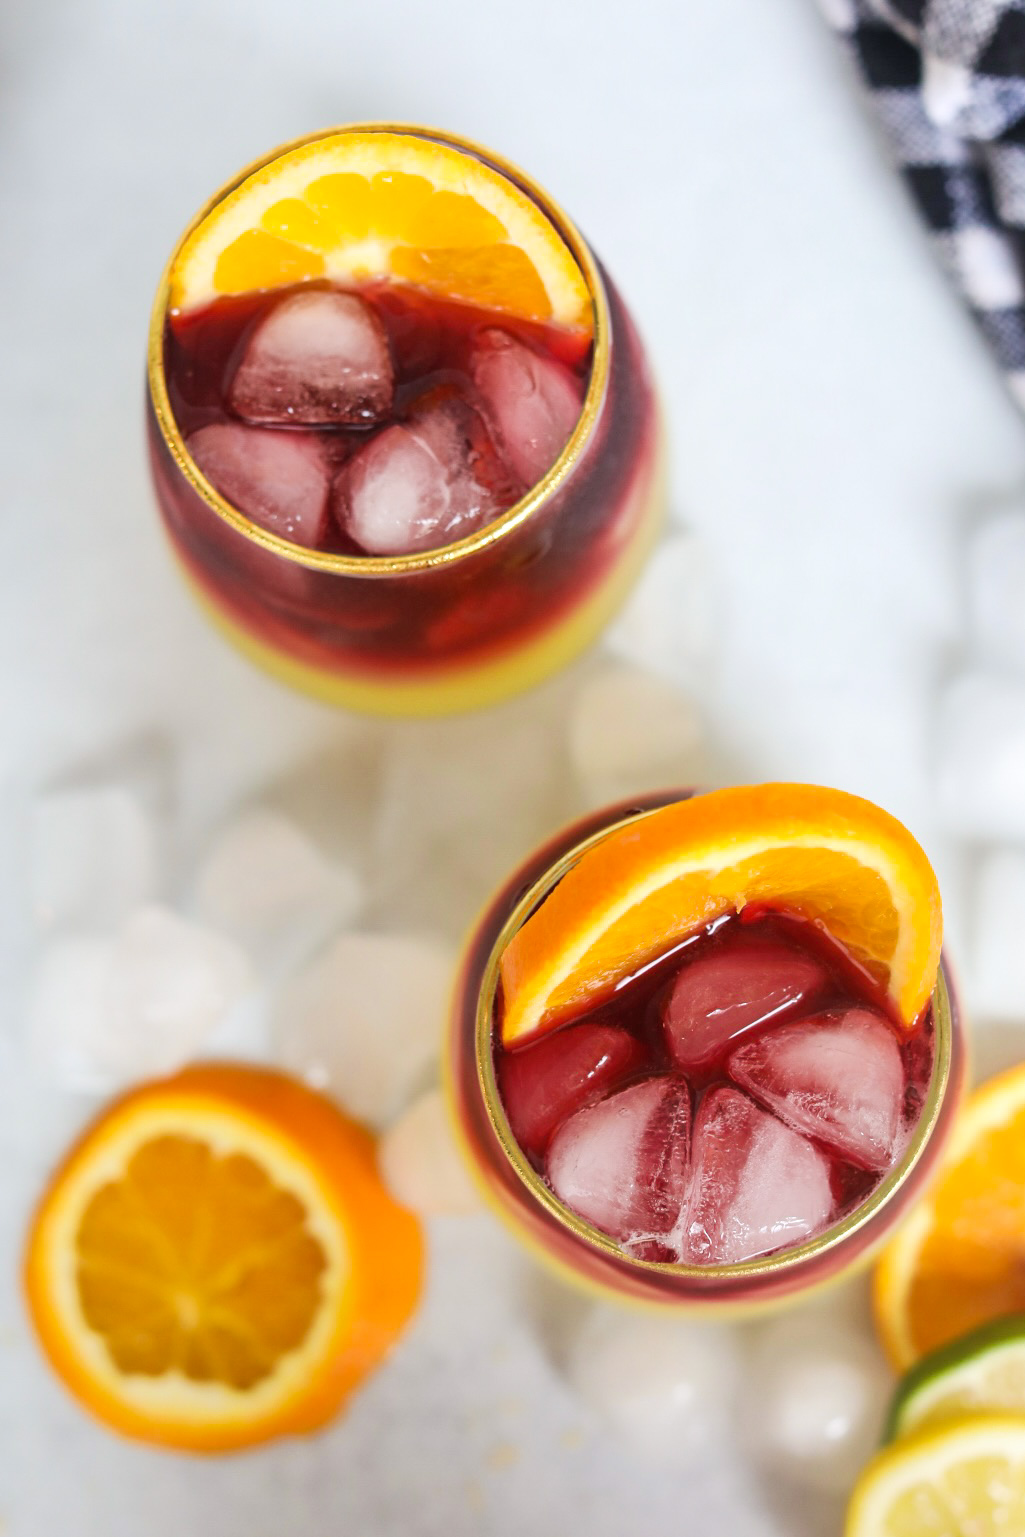 Top-down shot of two glasses filled with sangria margarita. Orange slices are added into the glasses and on around the glasses for styling purposes.